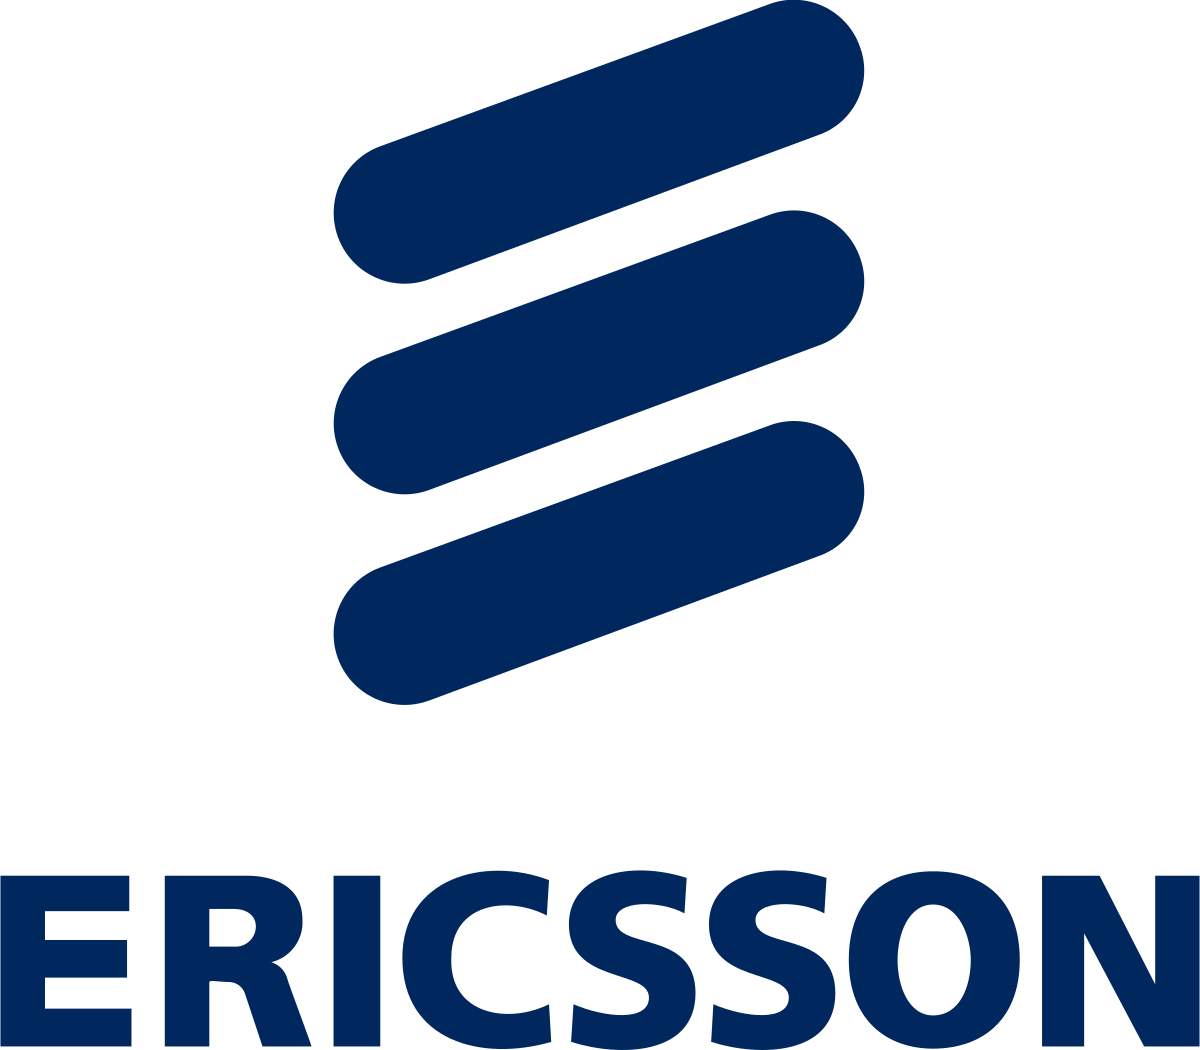 Ericsson To Pay A $1b Fine To Settle Corruption Charges Brought Against It By The U.S. Justice Dept.